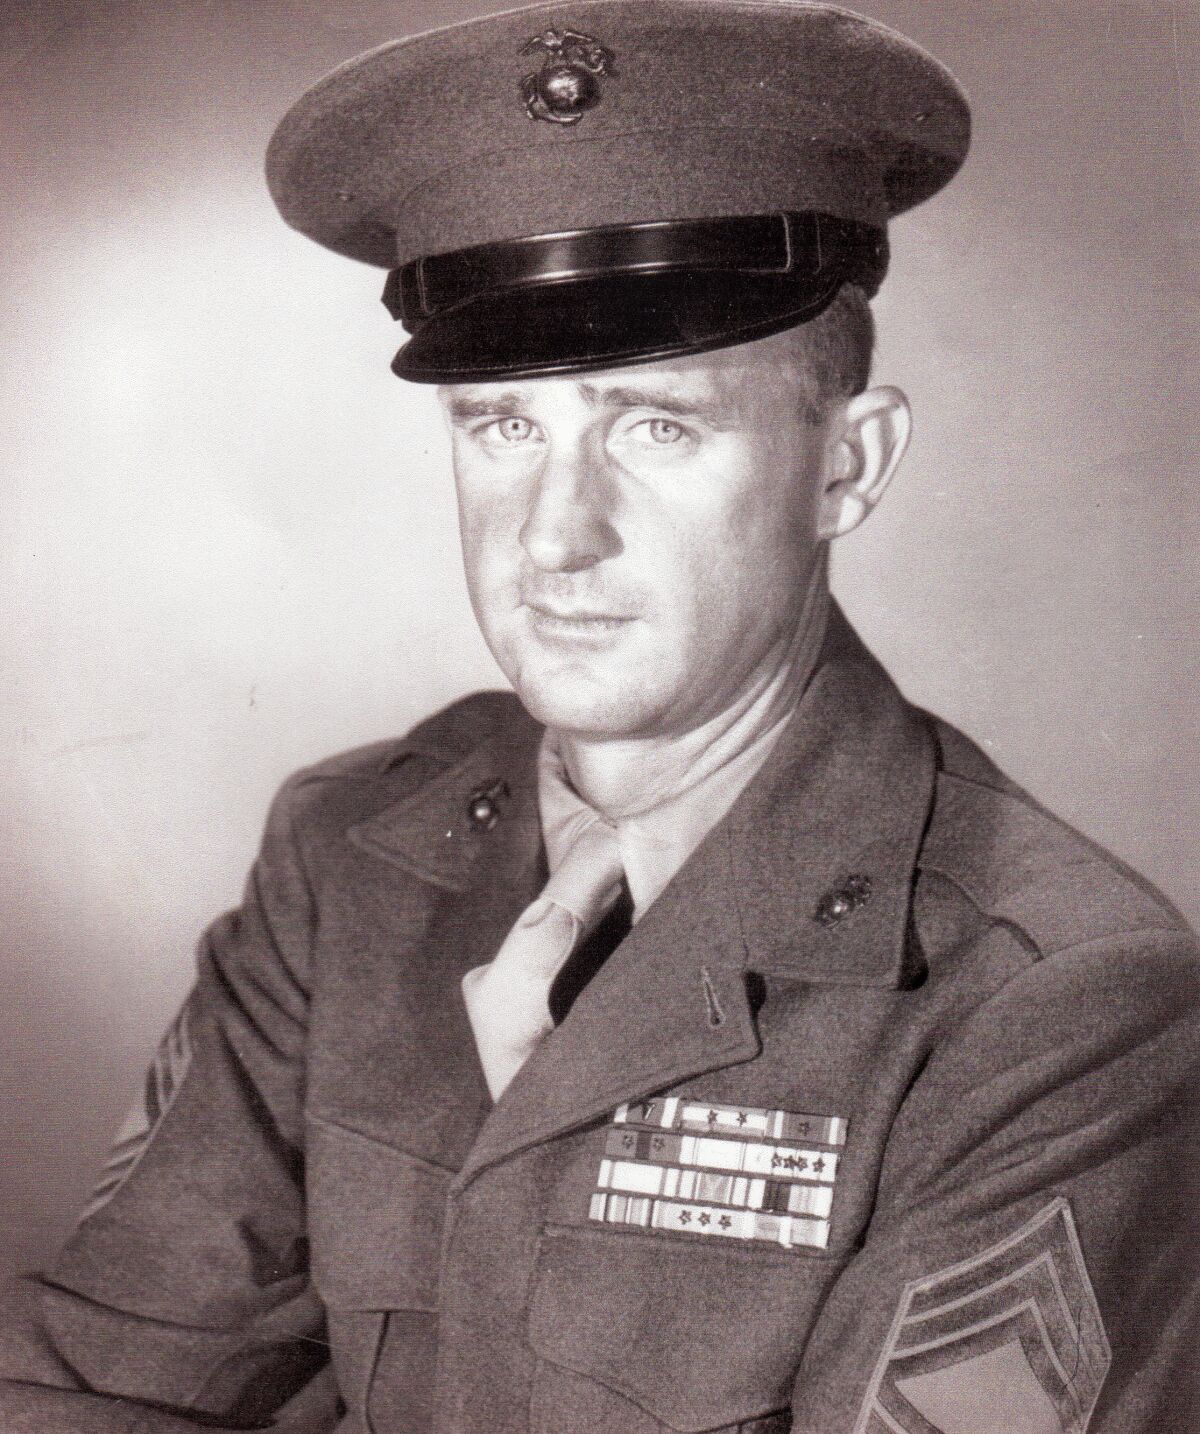 Marine First Sgt. John Farritor shown in a photograph taking after his service in the Korean War, in June 1951. The Vista resident, who also served in World War II, turned 100 on July 9, 2019.